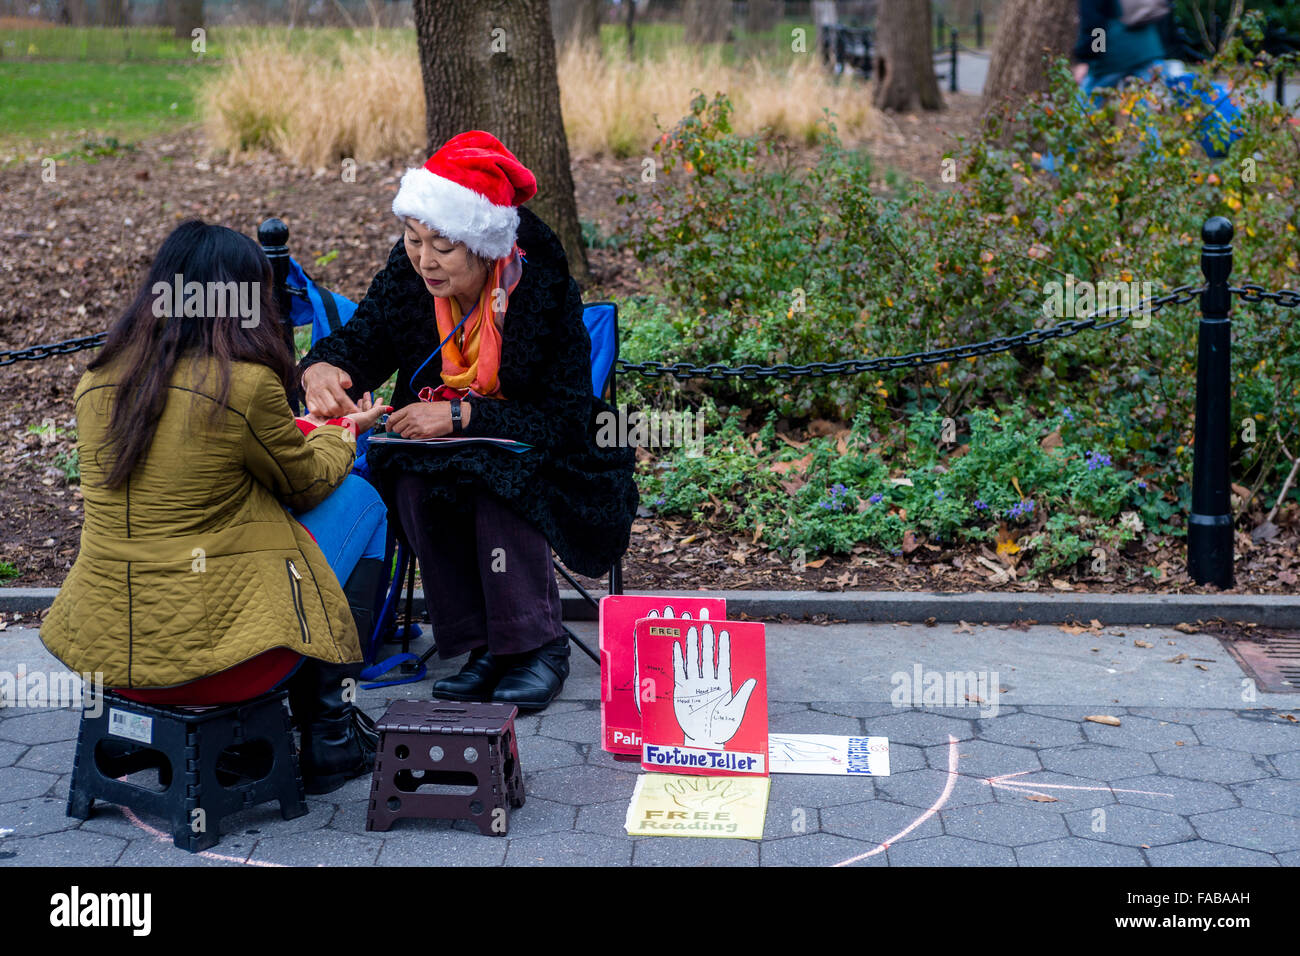 New York, NY 25 December 2015 - A Palm reader predicts a woman's on Christmas Day in Washington Square Park. Temperatures reached into the mid 60s on this unseasonably warm Christmas. ©Stacy Walsh Rosenstock/Alamy Stock Photo